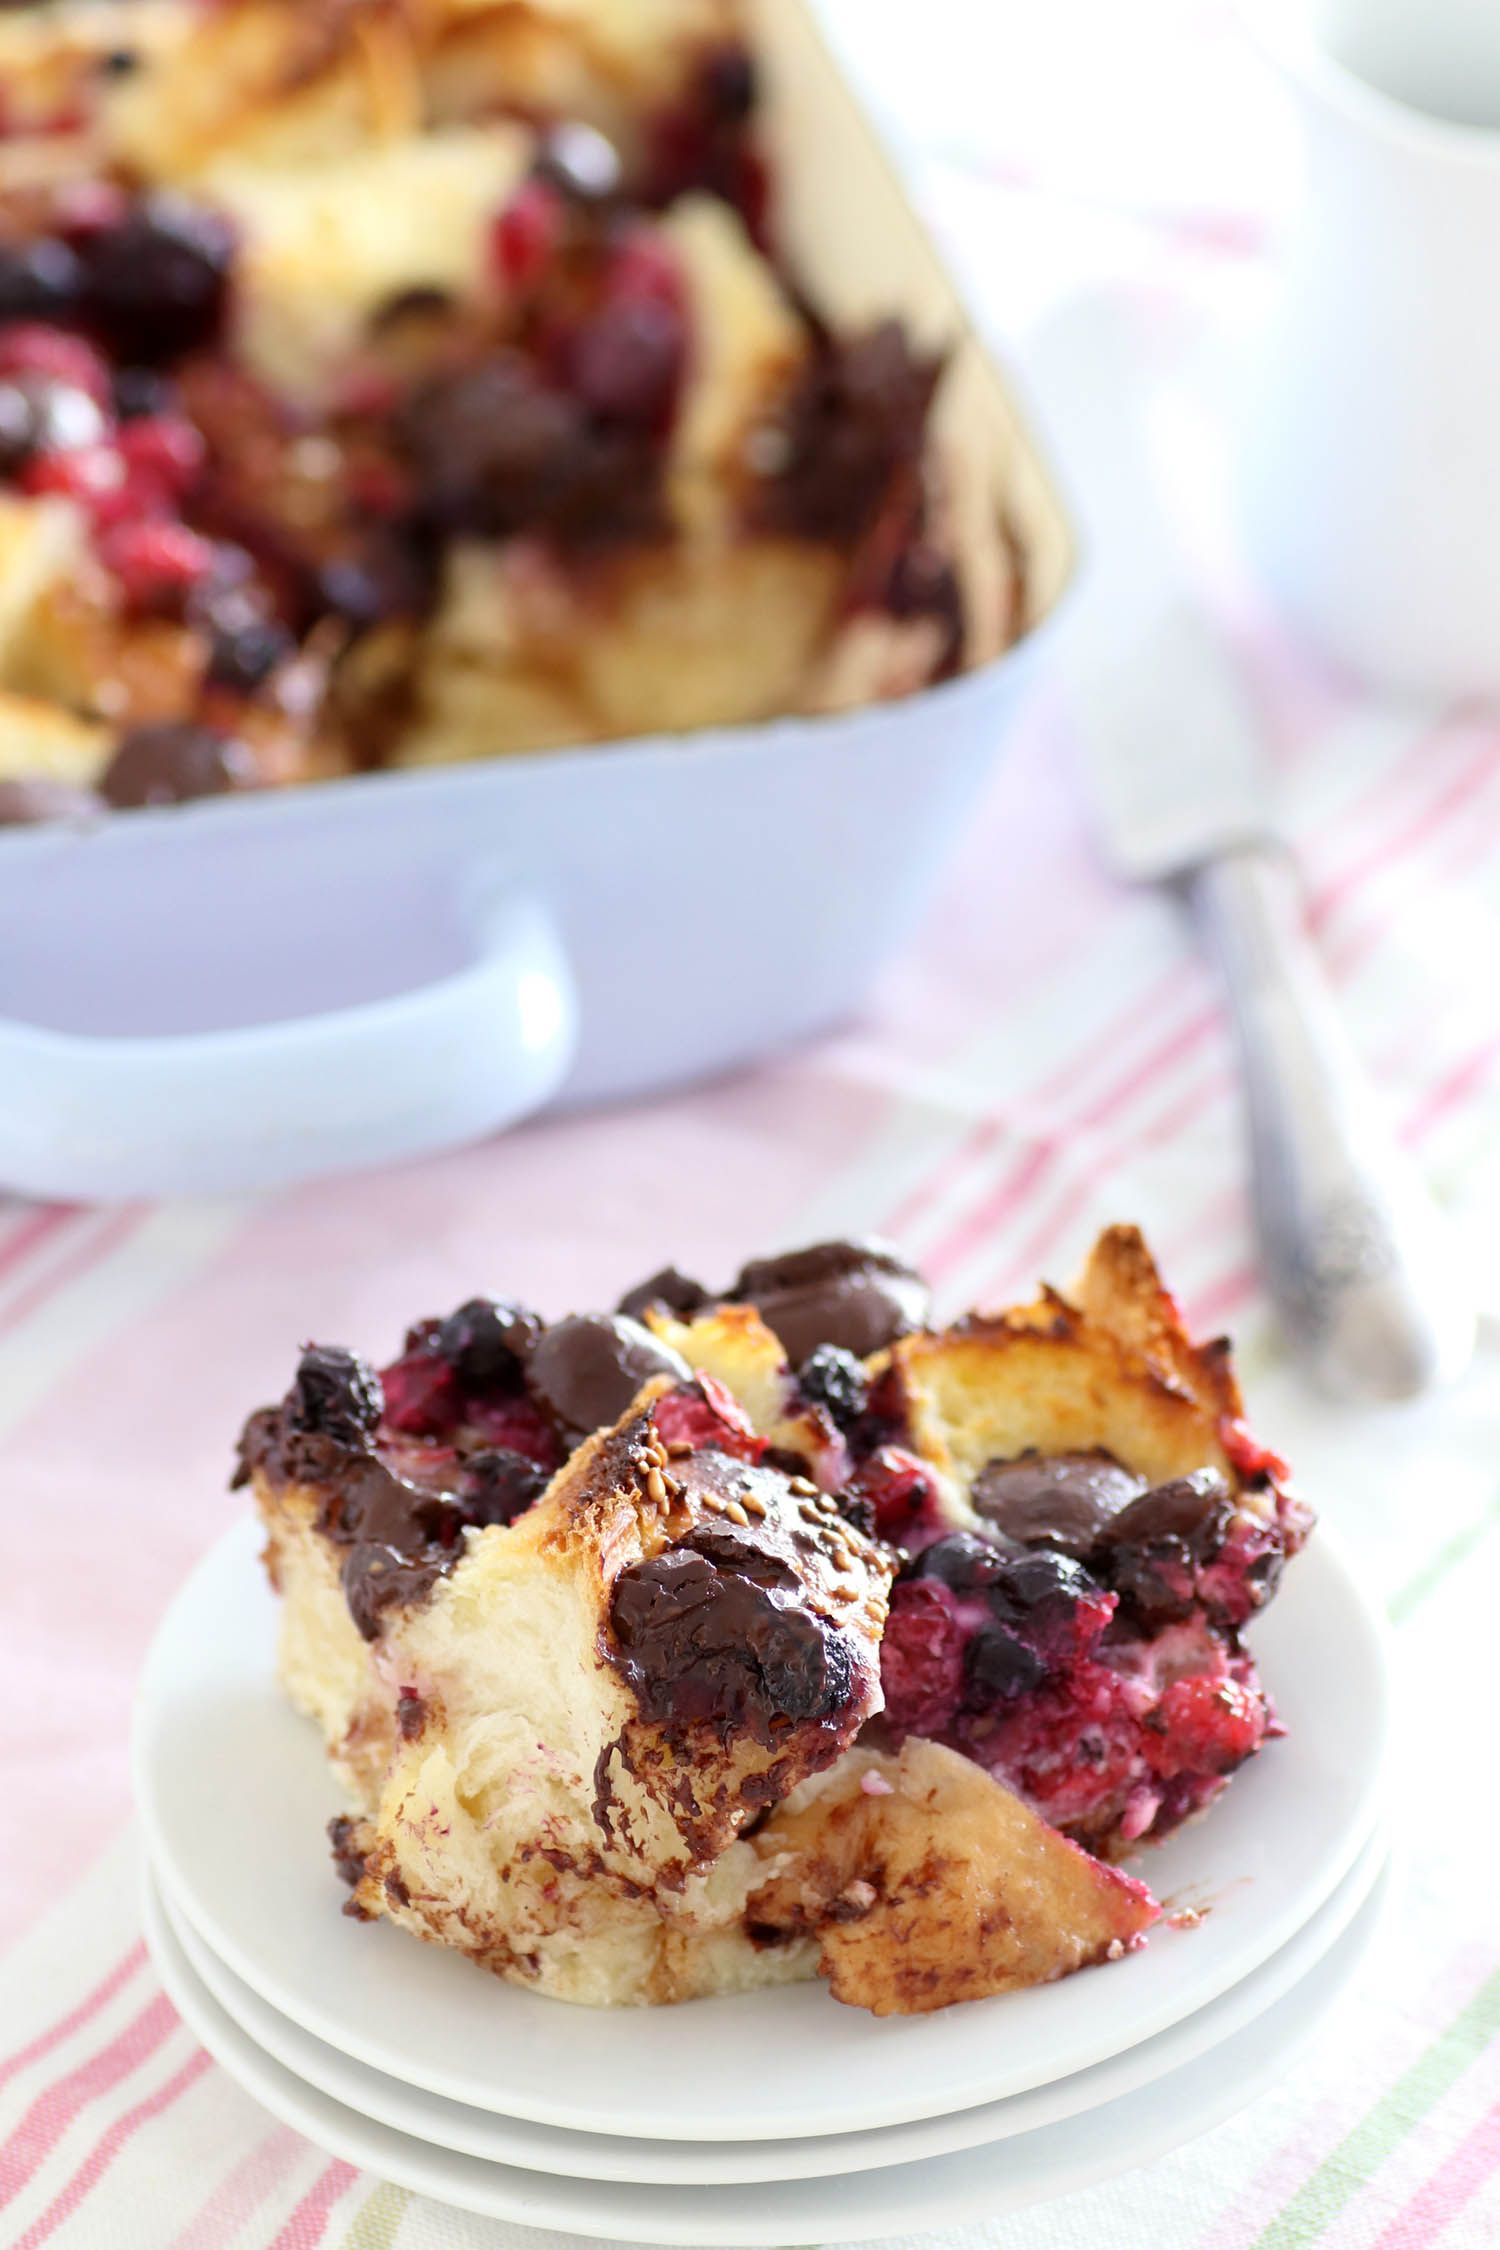 Chocolate Bread Pudding with Berries